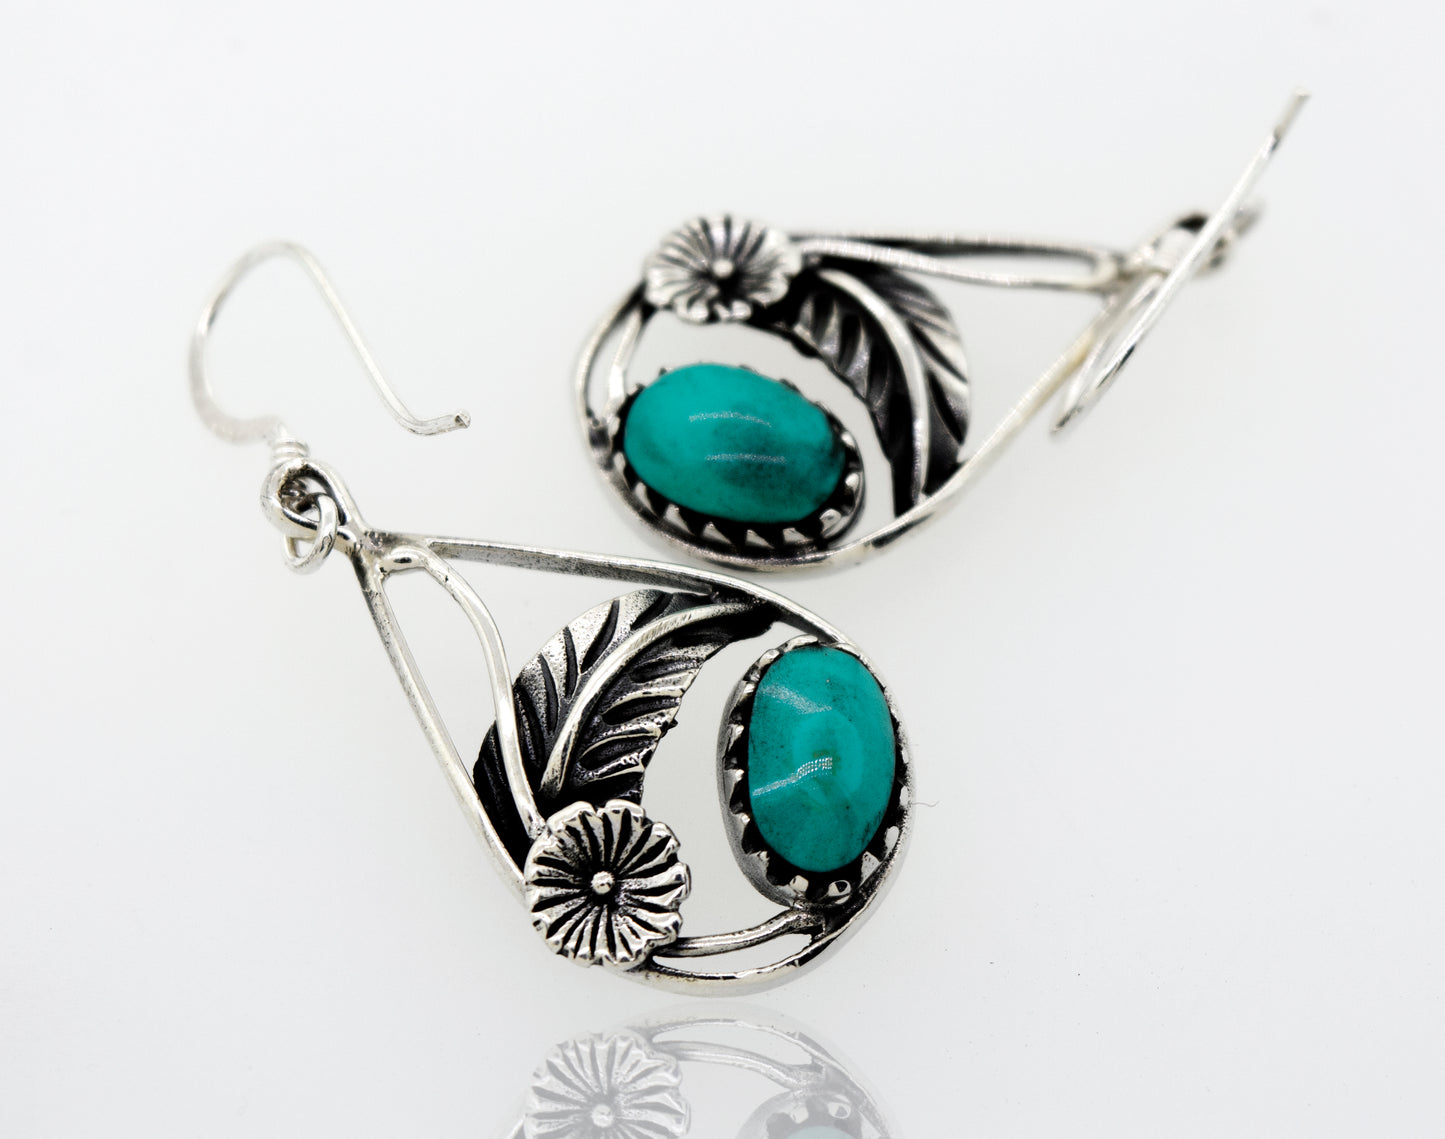 A pair of Turquoise Teardrop Earrings With Floral Setting from Super Silver, crafted from 925 sterling silver.